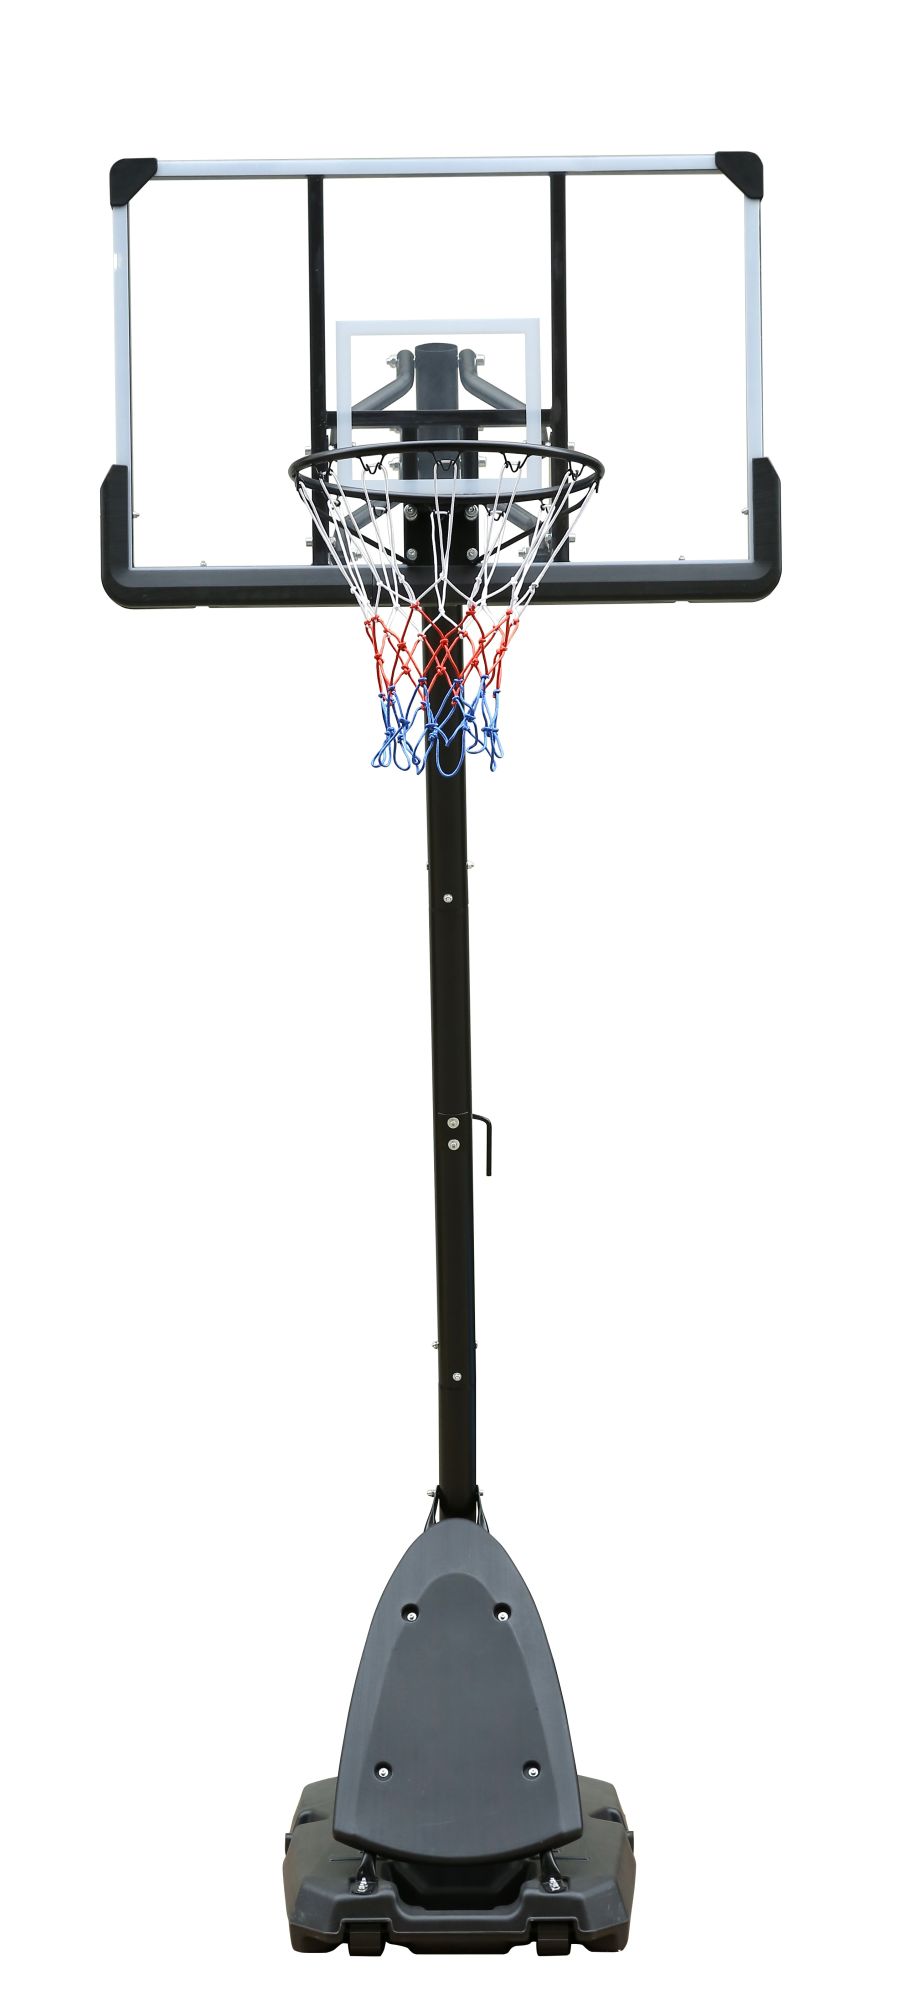 Use for Outdoor Height Adjustable 7.5 to 10ft Basketball Hoop 44 Inch Backboard Portable Basketball Goal System with Stable Base and Wheels